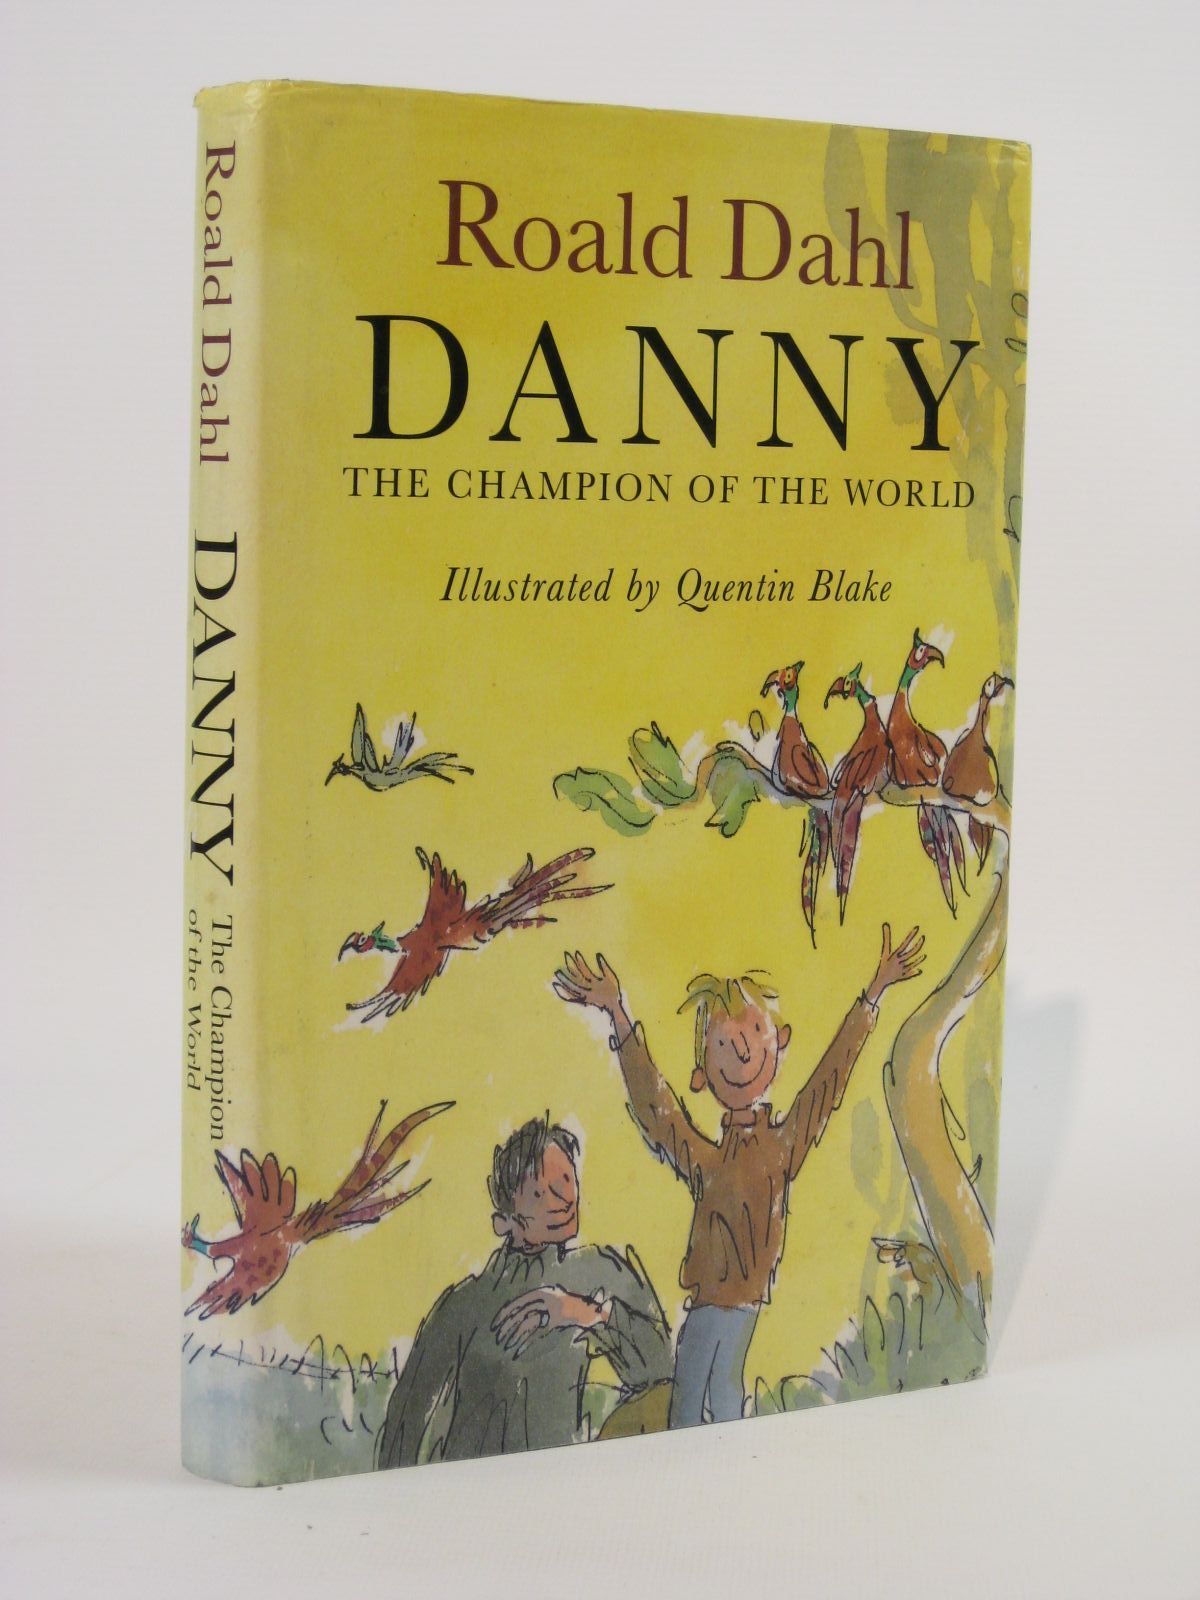 Stella And Rose S Books Danny The Champion Of The World Written By Roald Dahl Stock Code 1407066